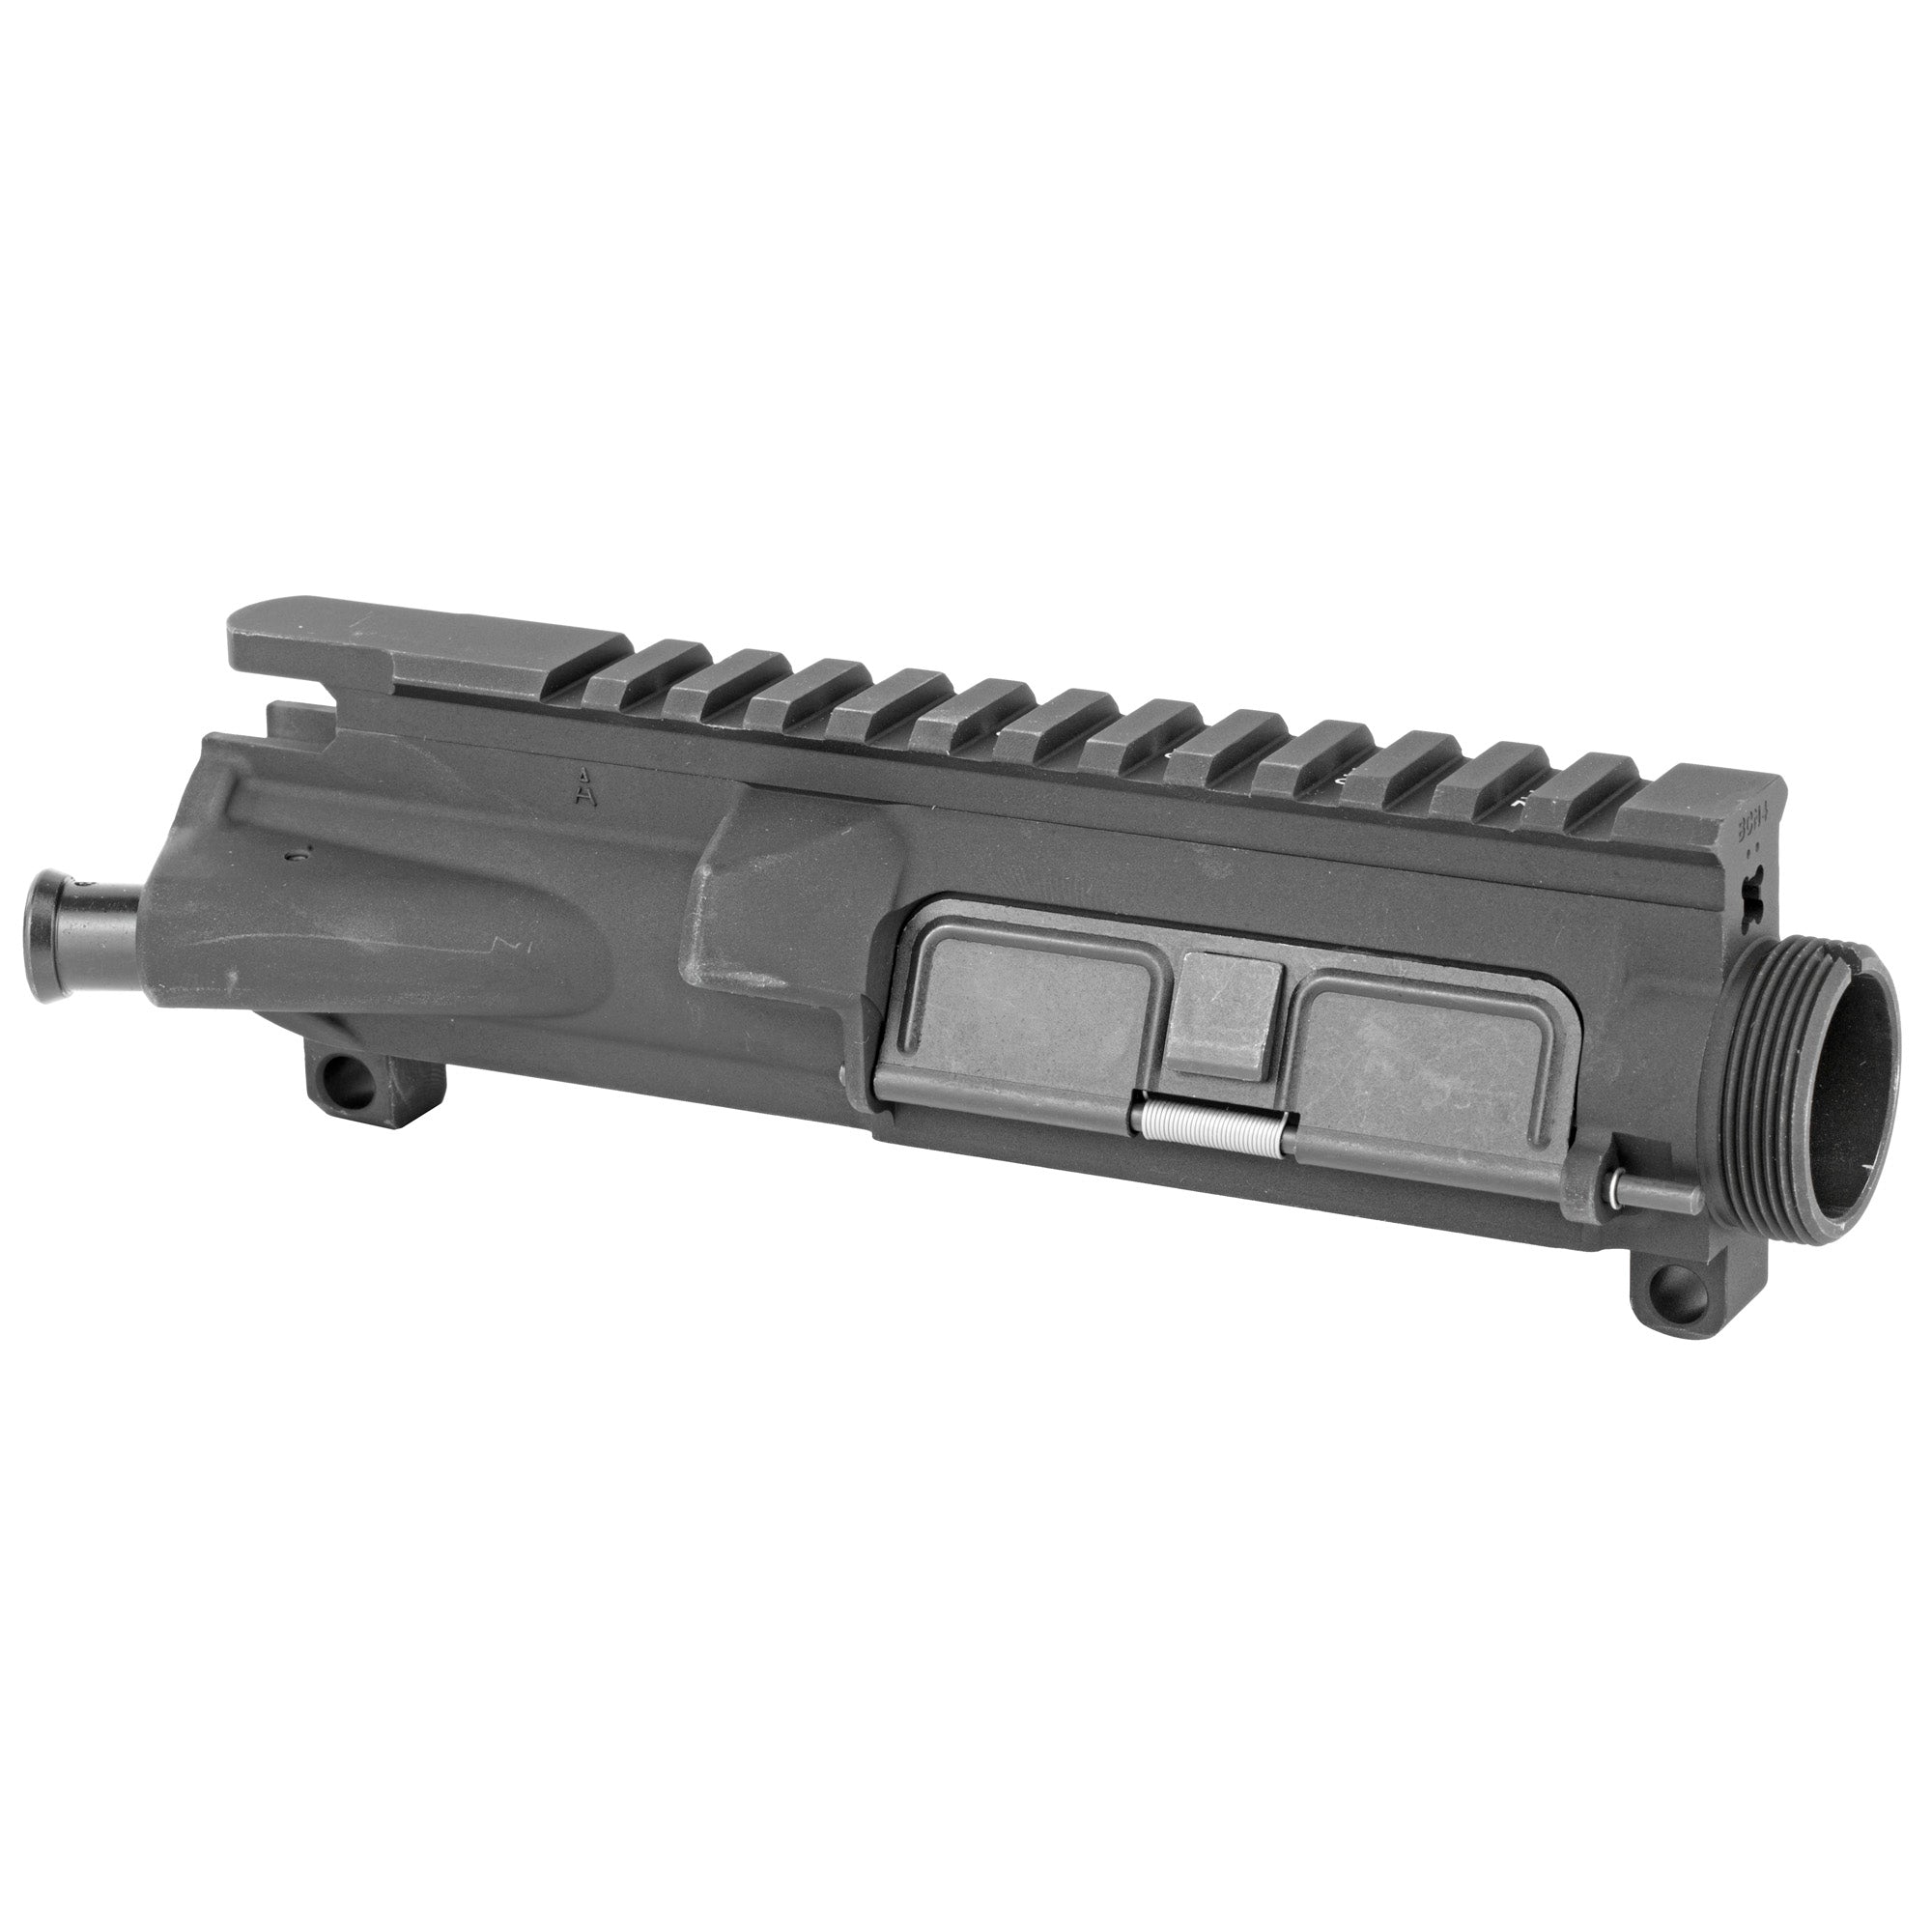 Bravo Company Mil-Spec Upper Receiver in black, featuring a flat top with a 1913 rail for optics, fully assembled with forward assist and ejection port cover.